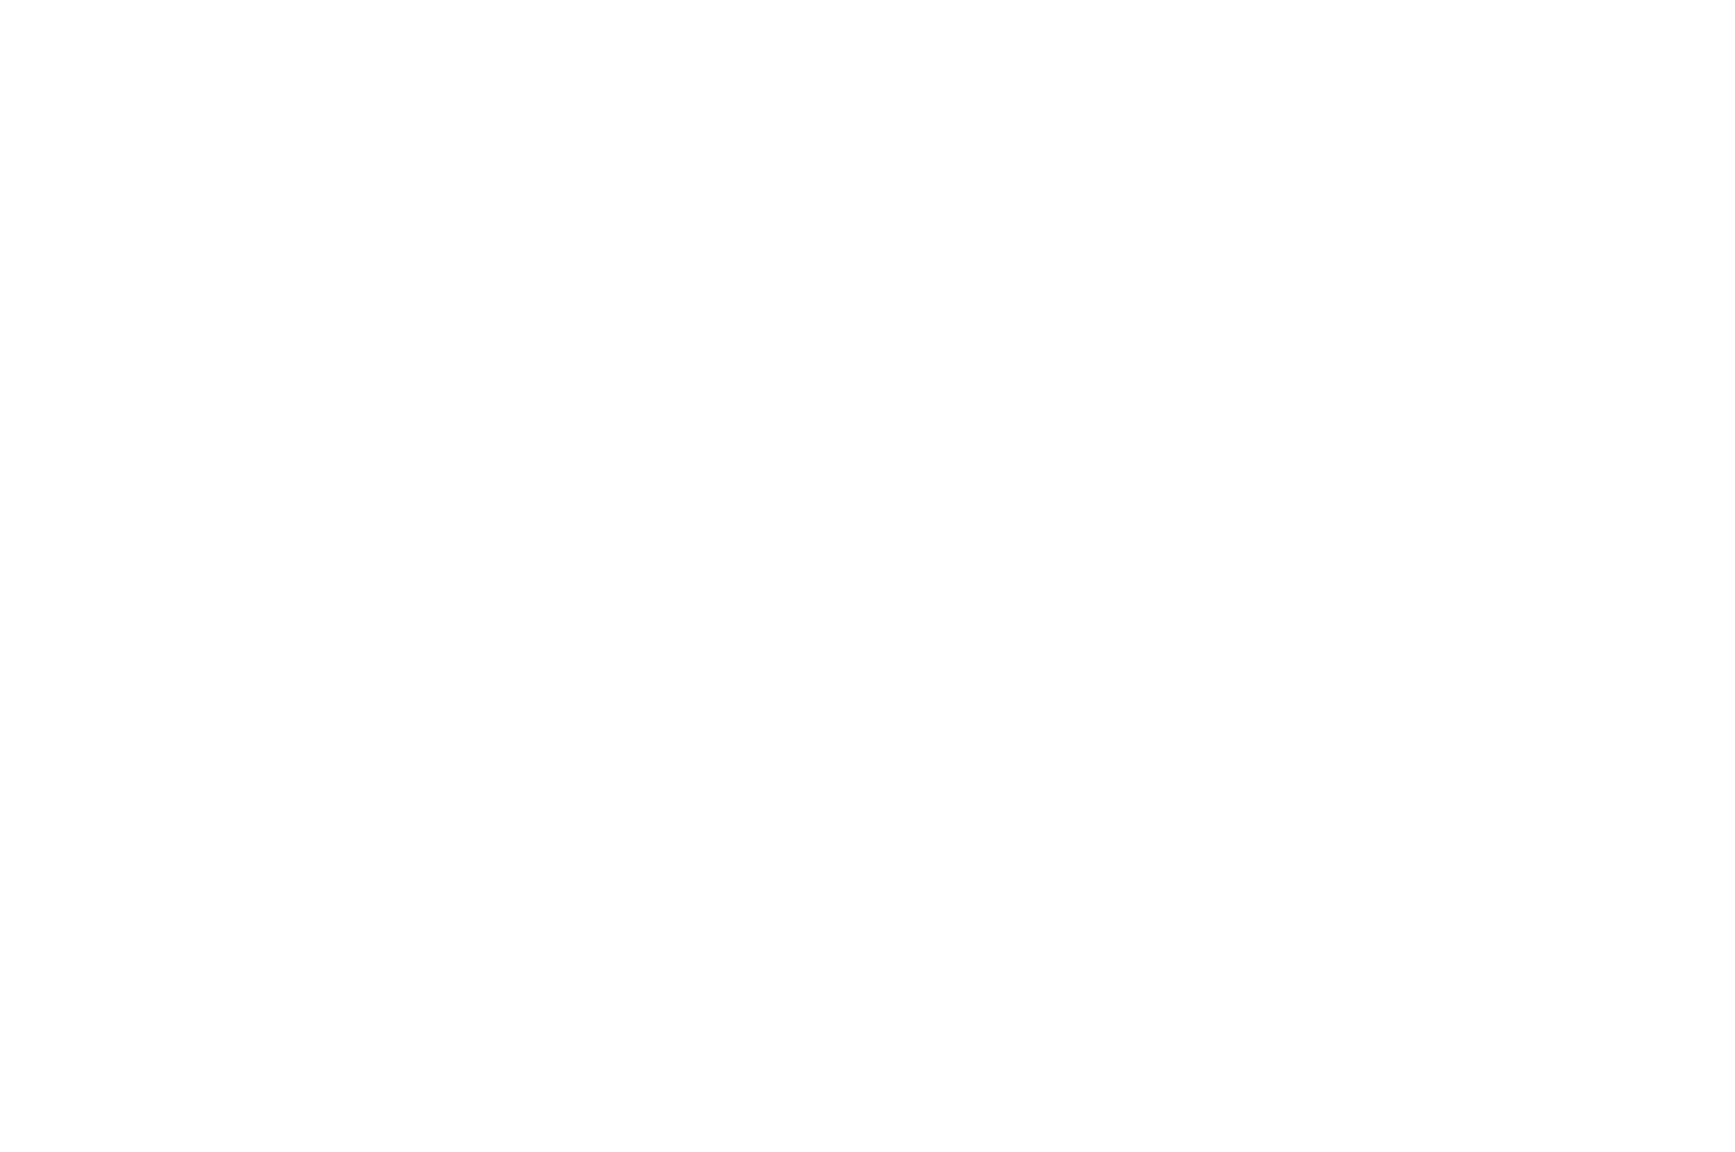 OFFICIAL SELECTION - NYC INDIE FILM AWARDS - 2016 (1).png